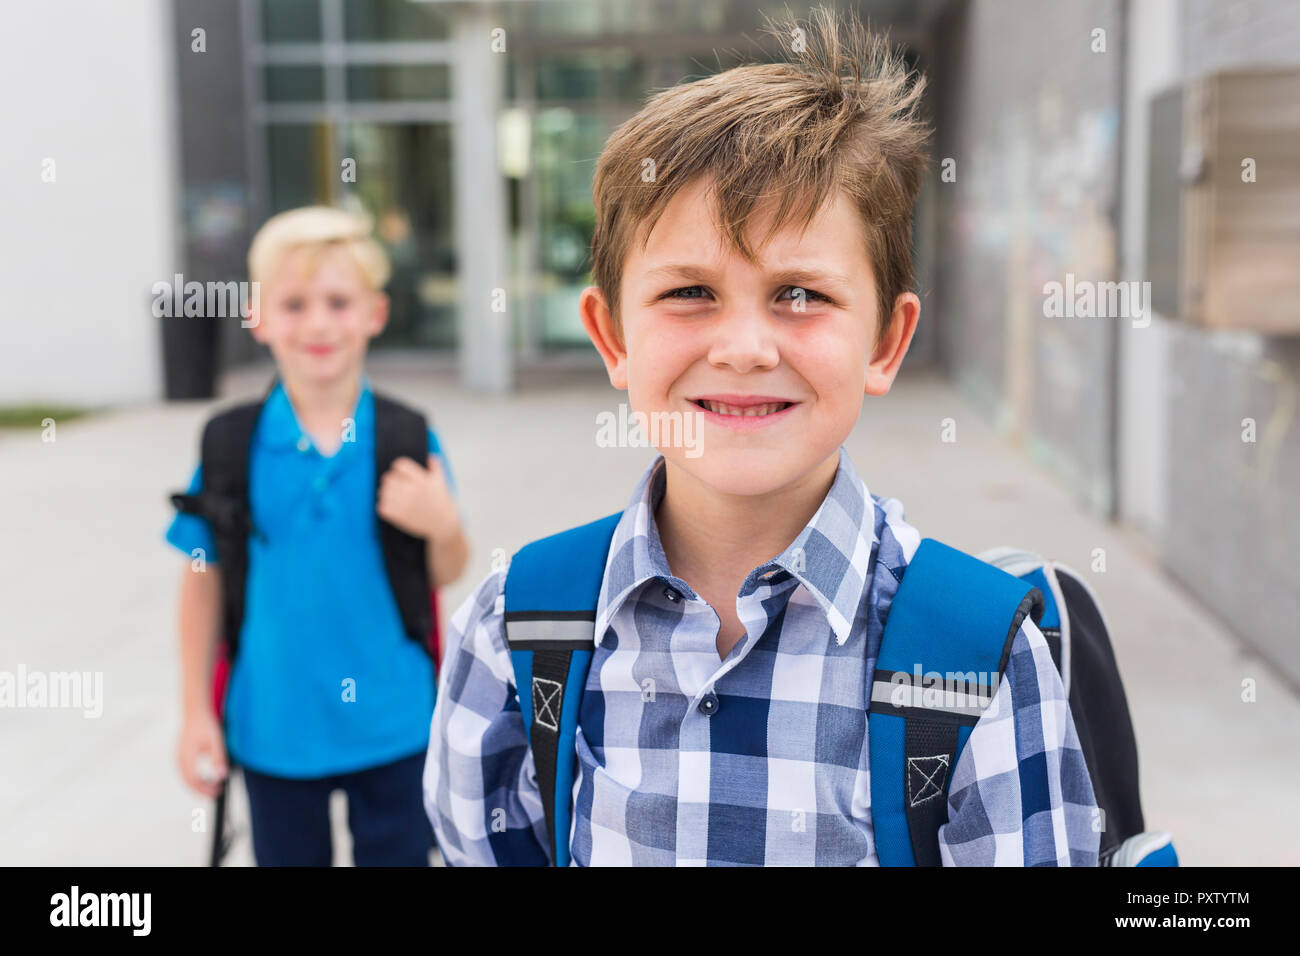 students outside school standing together on the day of school Stock Photo